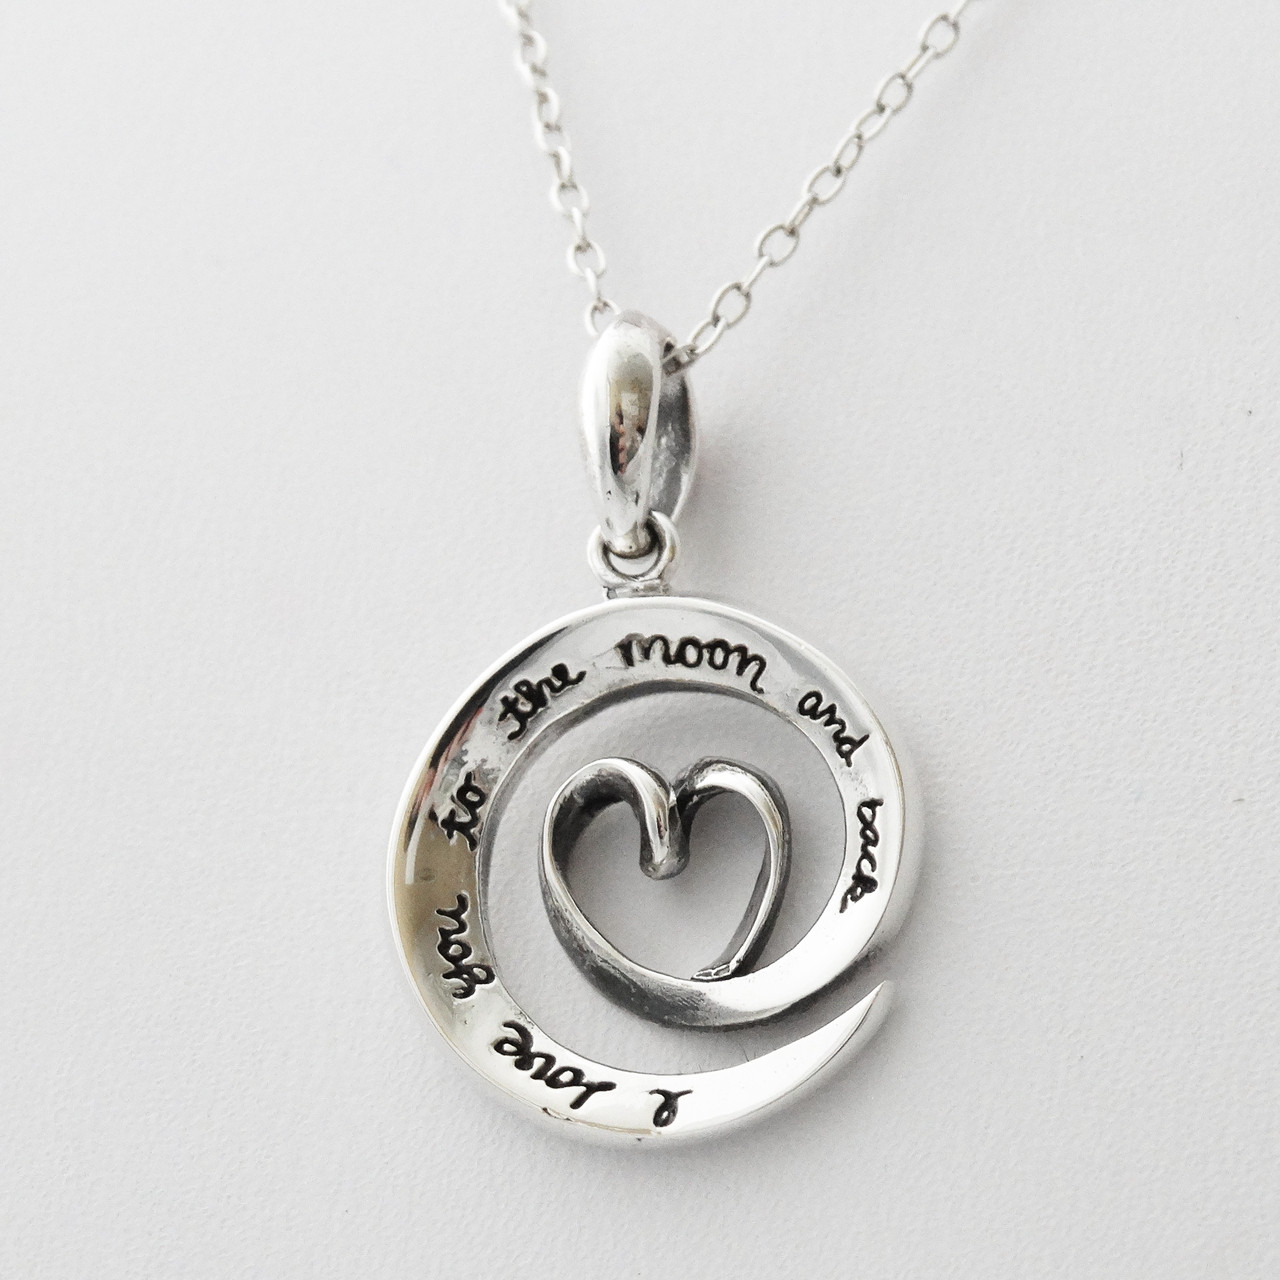 To the Moon & Back Necklace - Luna & Stella